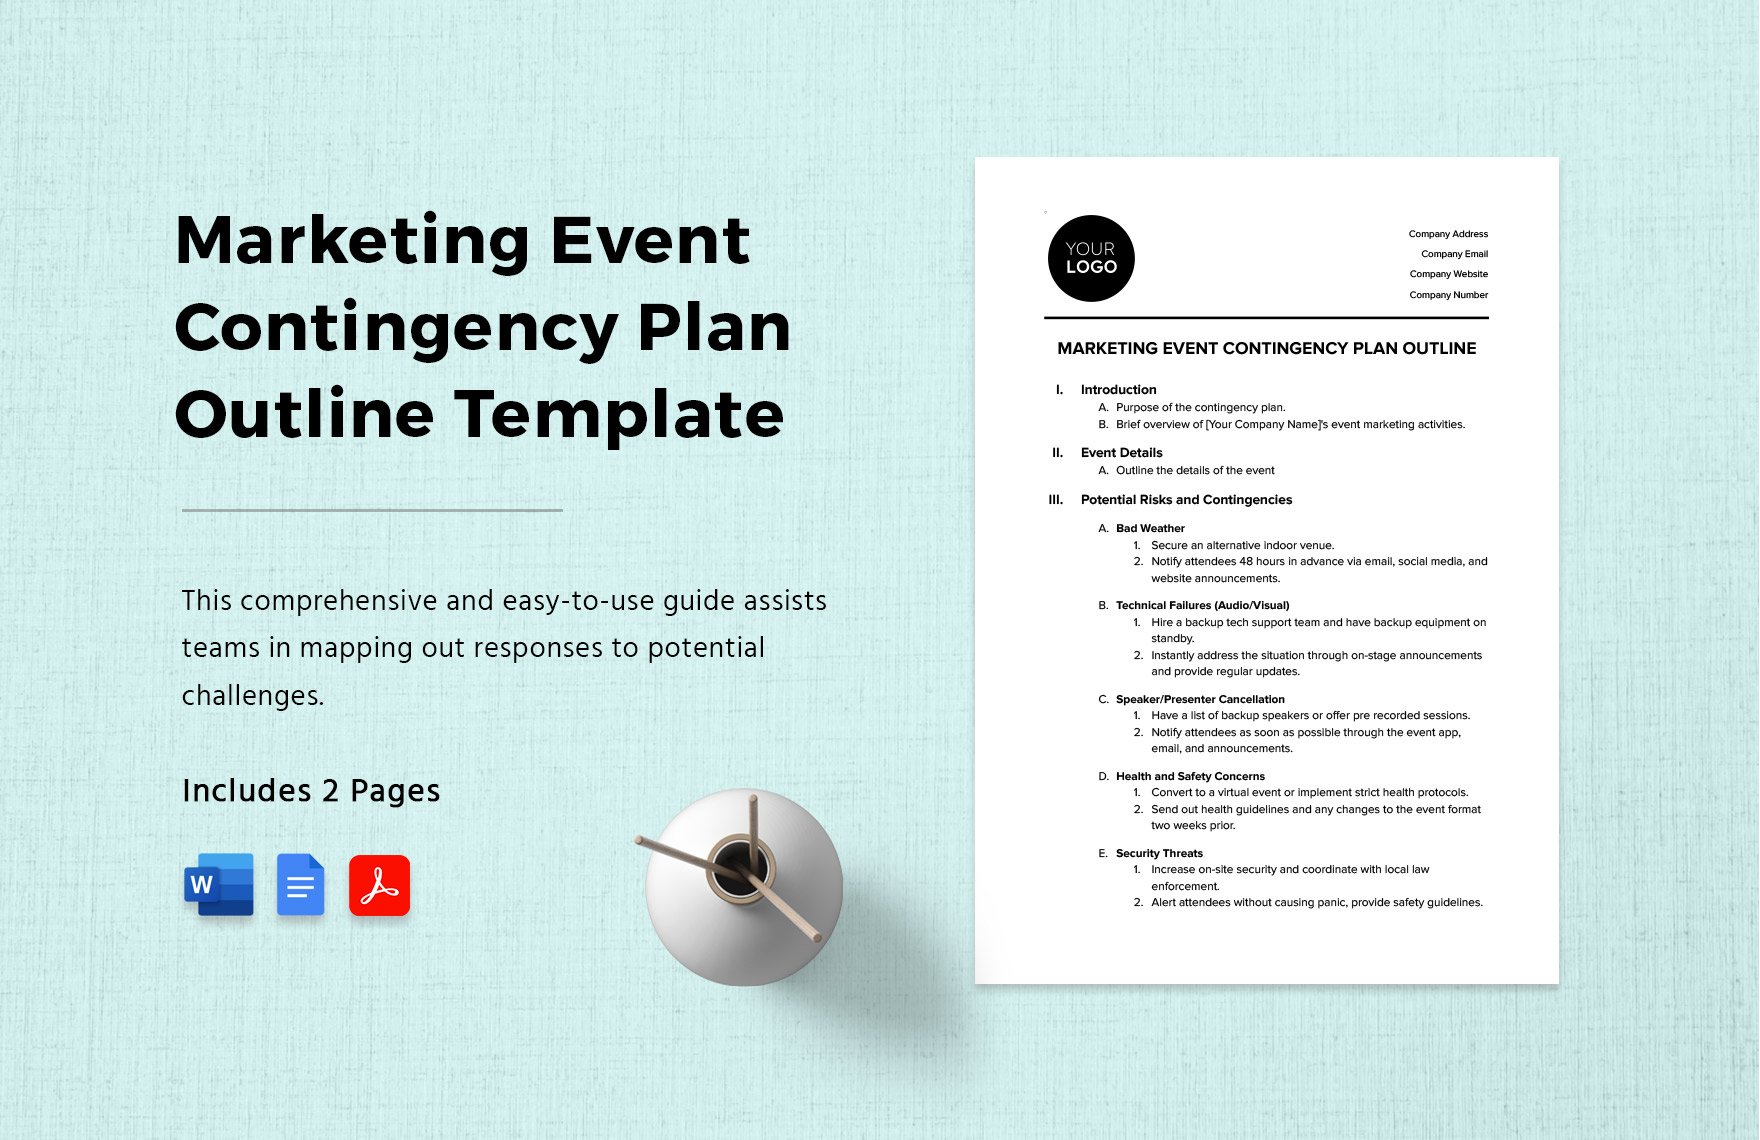 Marketing Event Contingency Plan Outline Template in Word, Google Docs, PDF